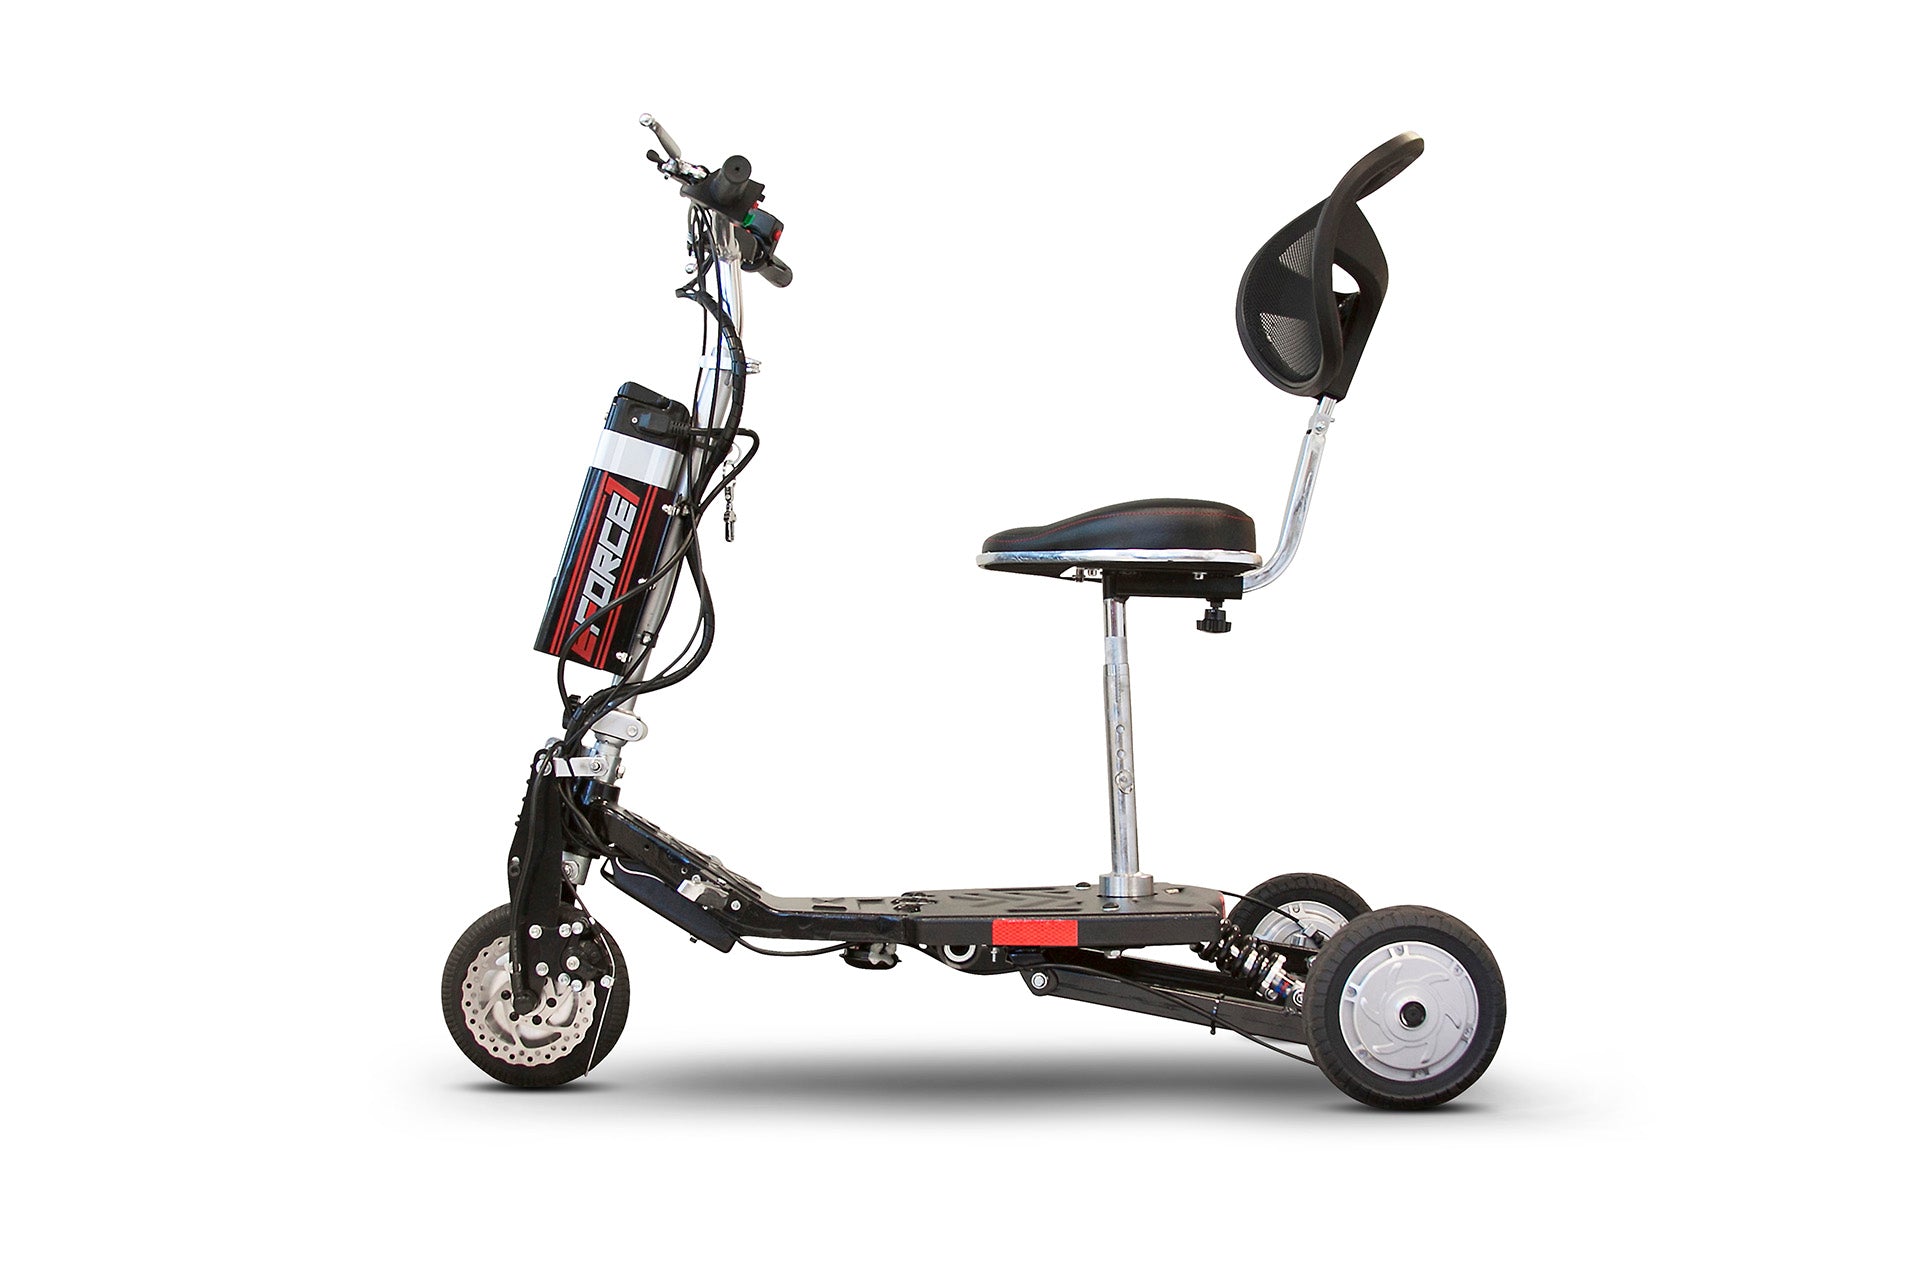 BLACK 3WHEEL SCOOTER EW-07 Eforce 3 Wheel Mobility Scooter-Airline Approved - Lithium Battery By E-Wheels - PureUps